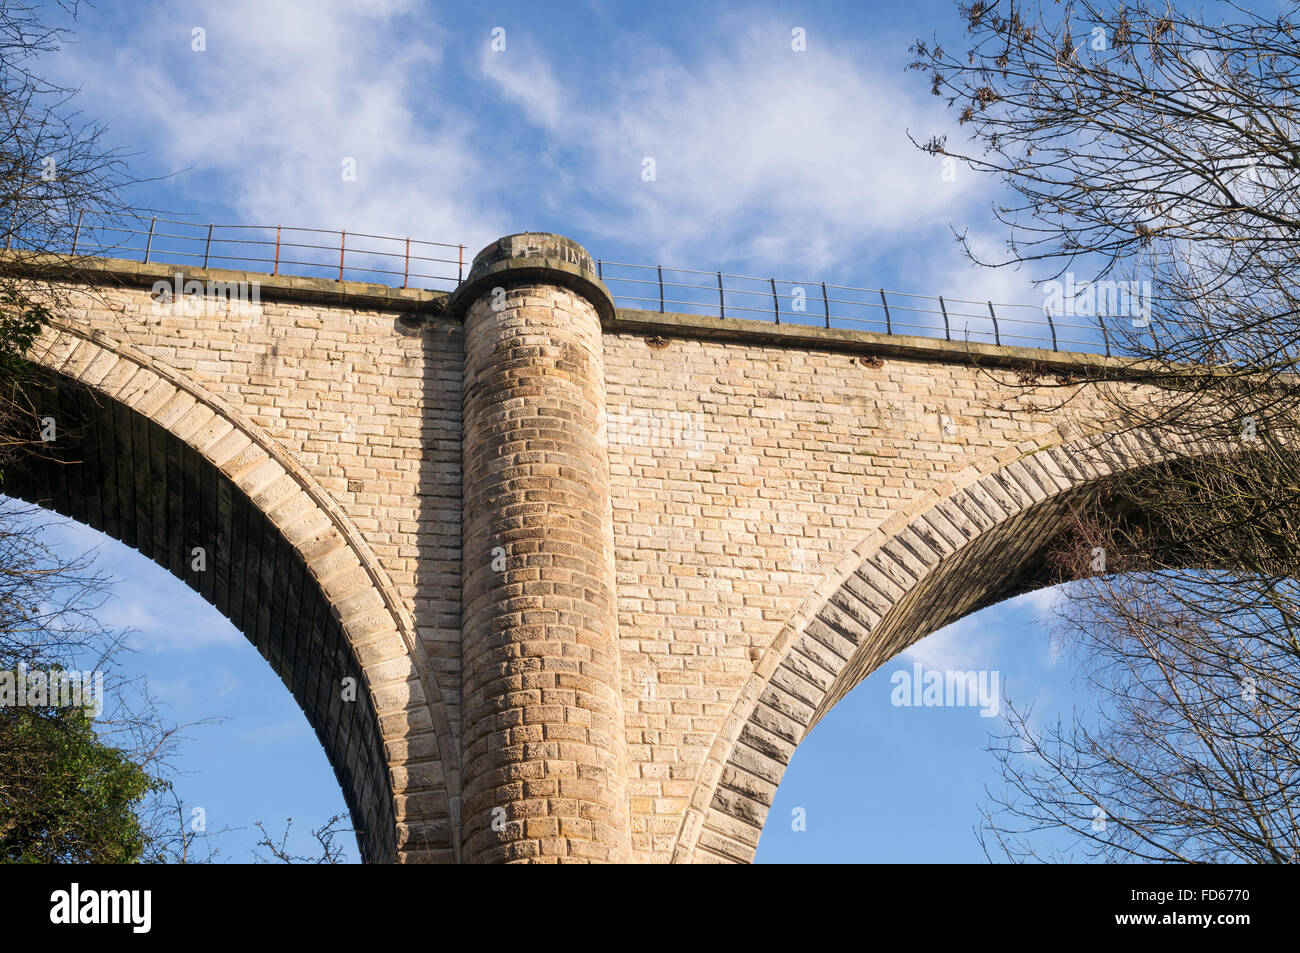 A view of one of the piers of the Victoria Bridge or railway viaduct over the river Wear in Washington, north east England UK Stock Photo